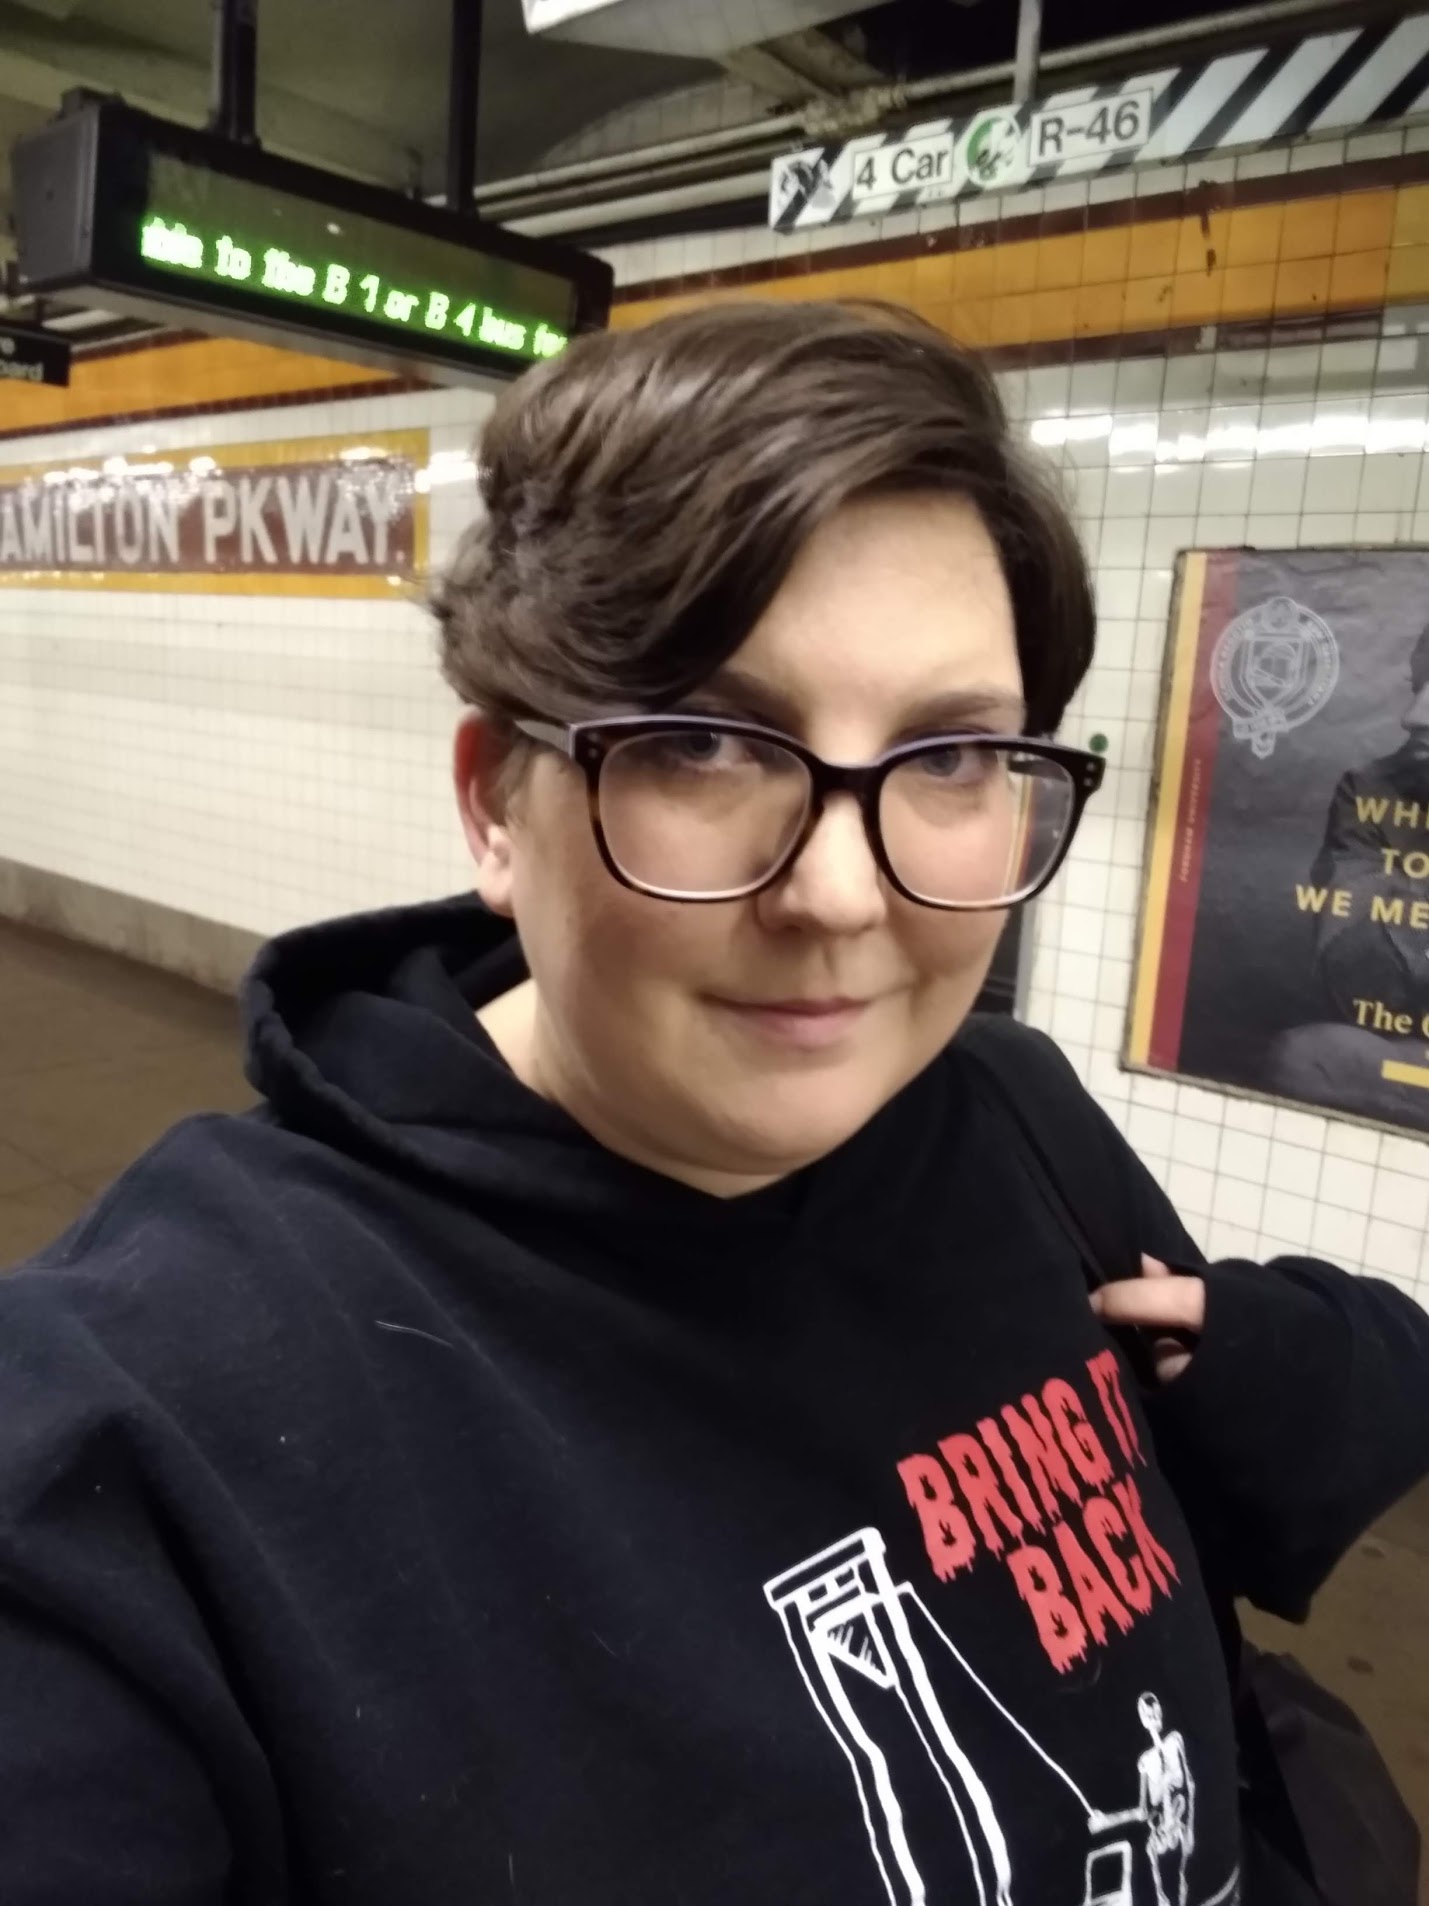 Me wearing my guillotine hoodie in the subway station